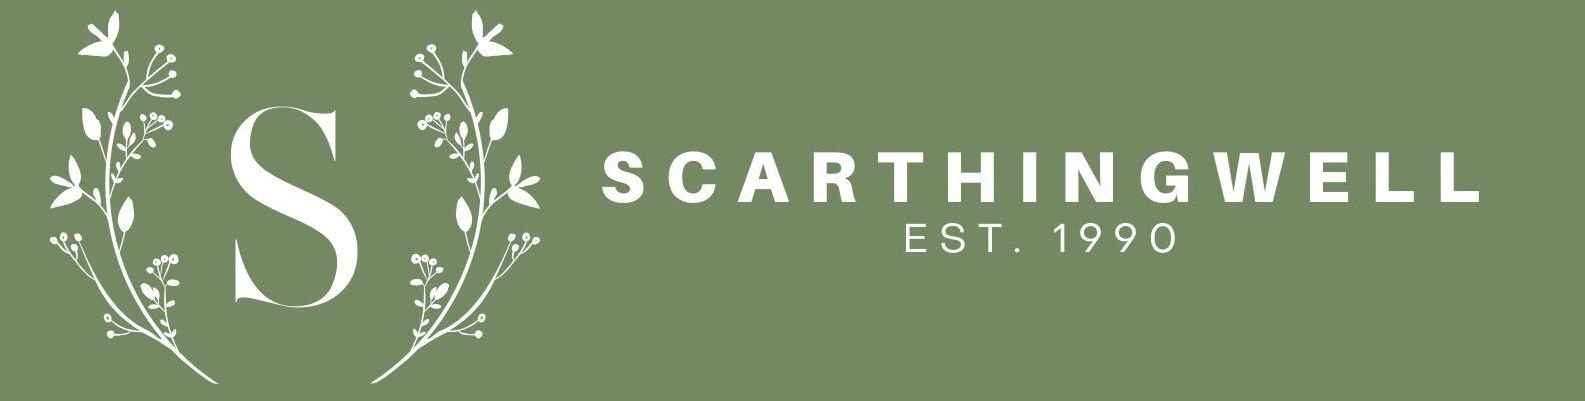 Scarthingwell Wholesale for Artificial Plants, Trees, Vanity Cases, Furniture, Interiors & Gifts - UK Trade Suppliers